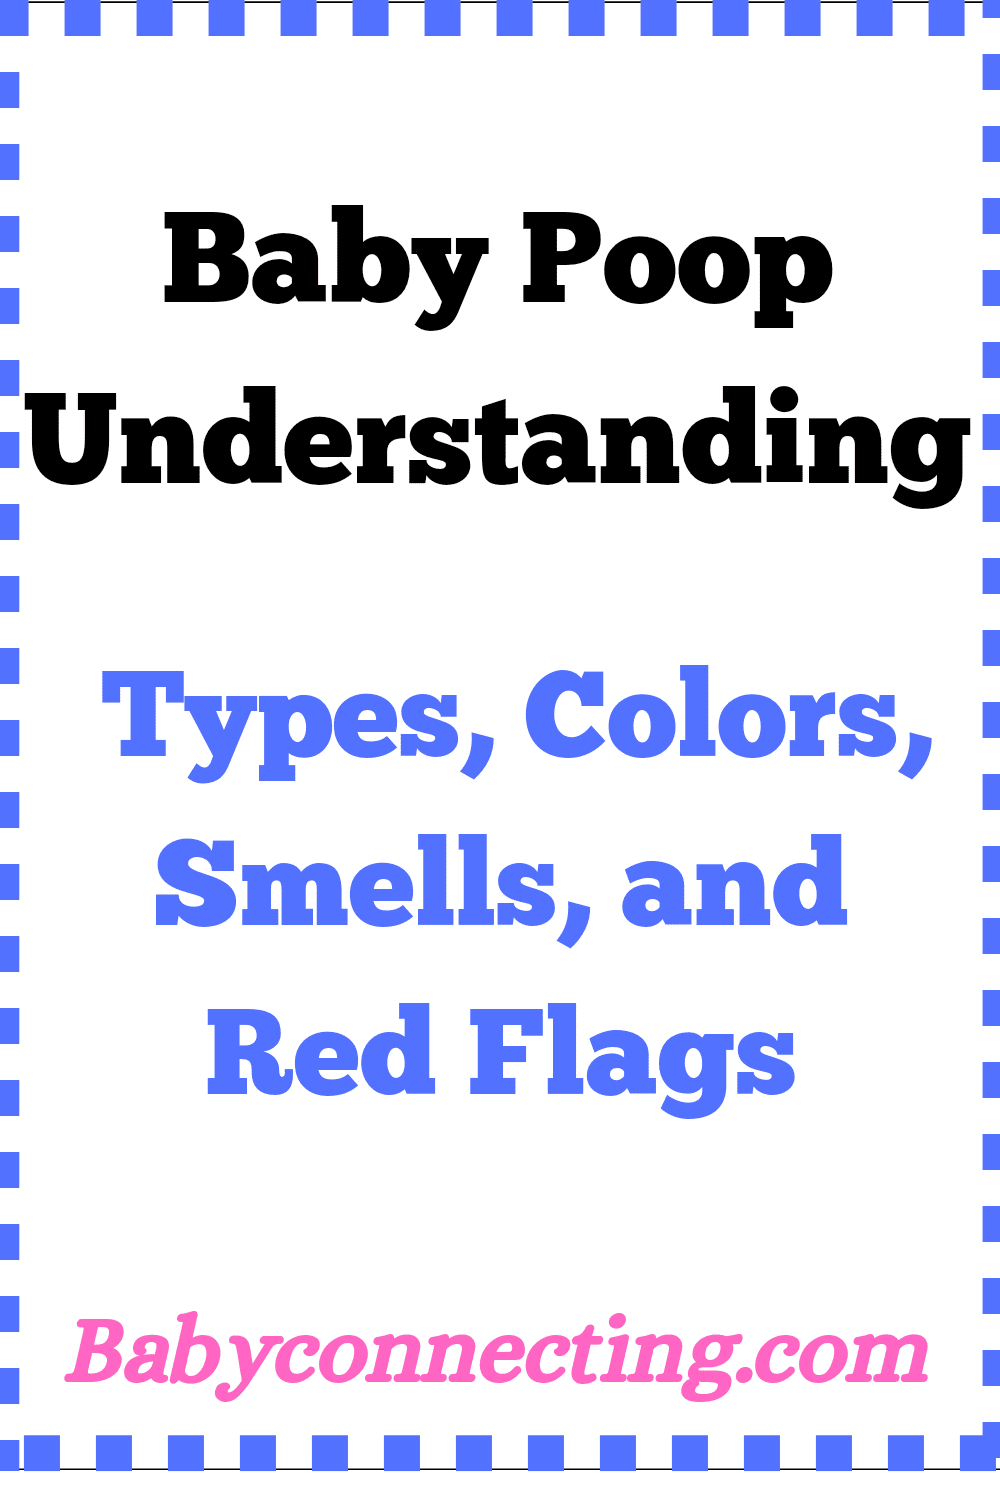 Baby Poop: Understanding Types, Colors, Smells, and Red Flags